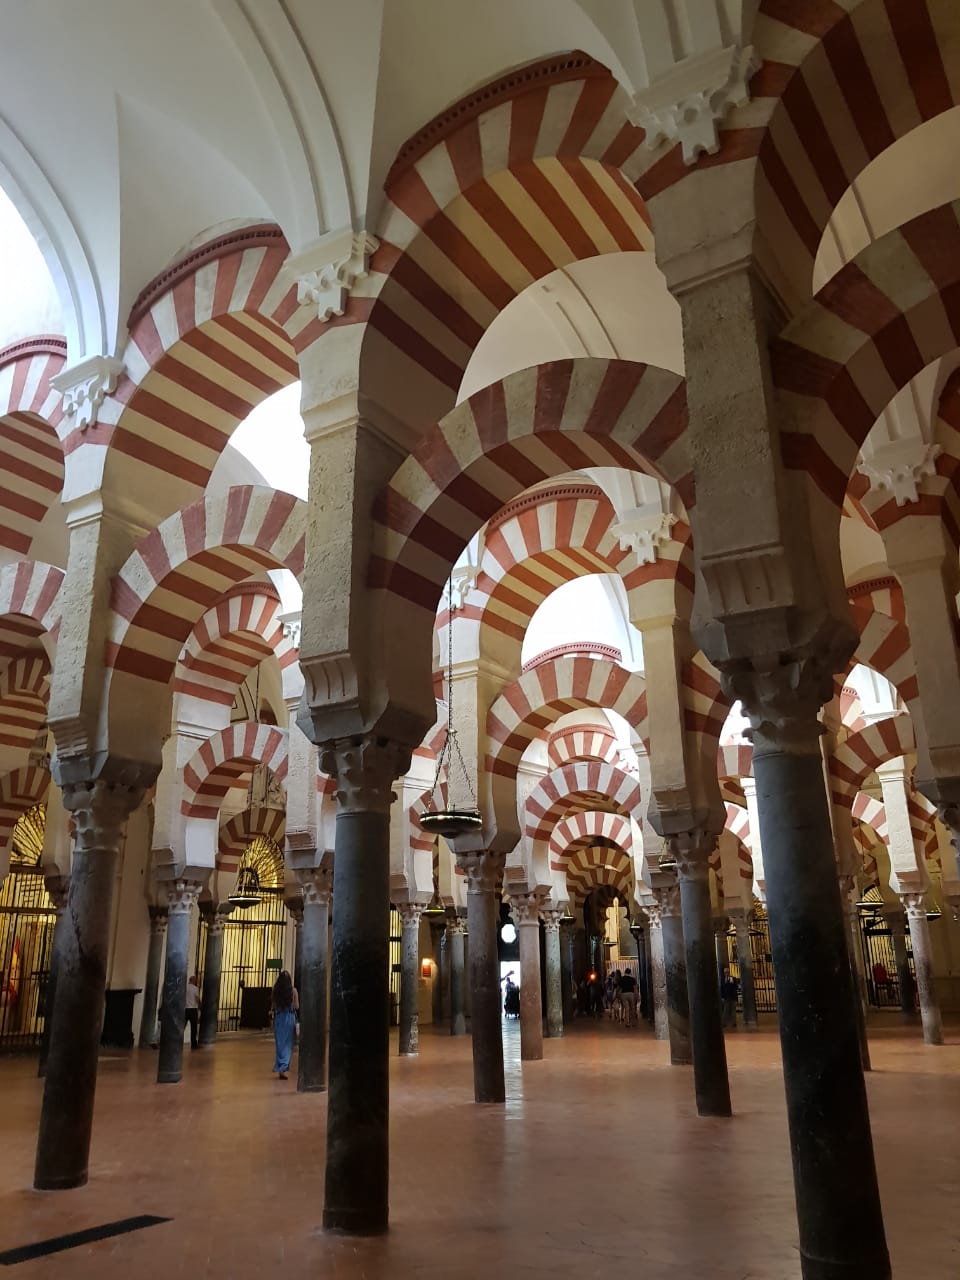 Cordoba Spain is one of the best UNESCO heritage sites in Europe. Read the article to discover more natural sites in Europe, and a list of world heritage in Europe to add to your bucket list. #UNESCO #unescosites #unescositeseurope #europeunesco #spainunesco #spain